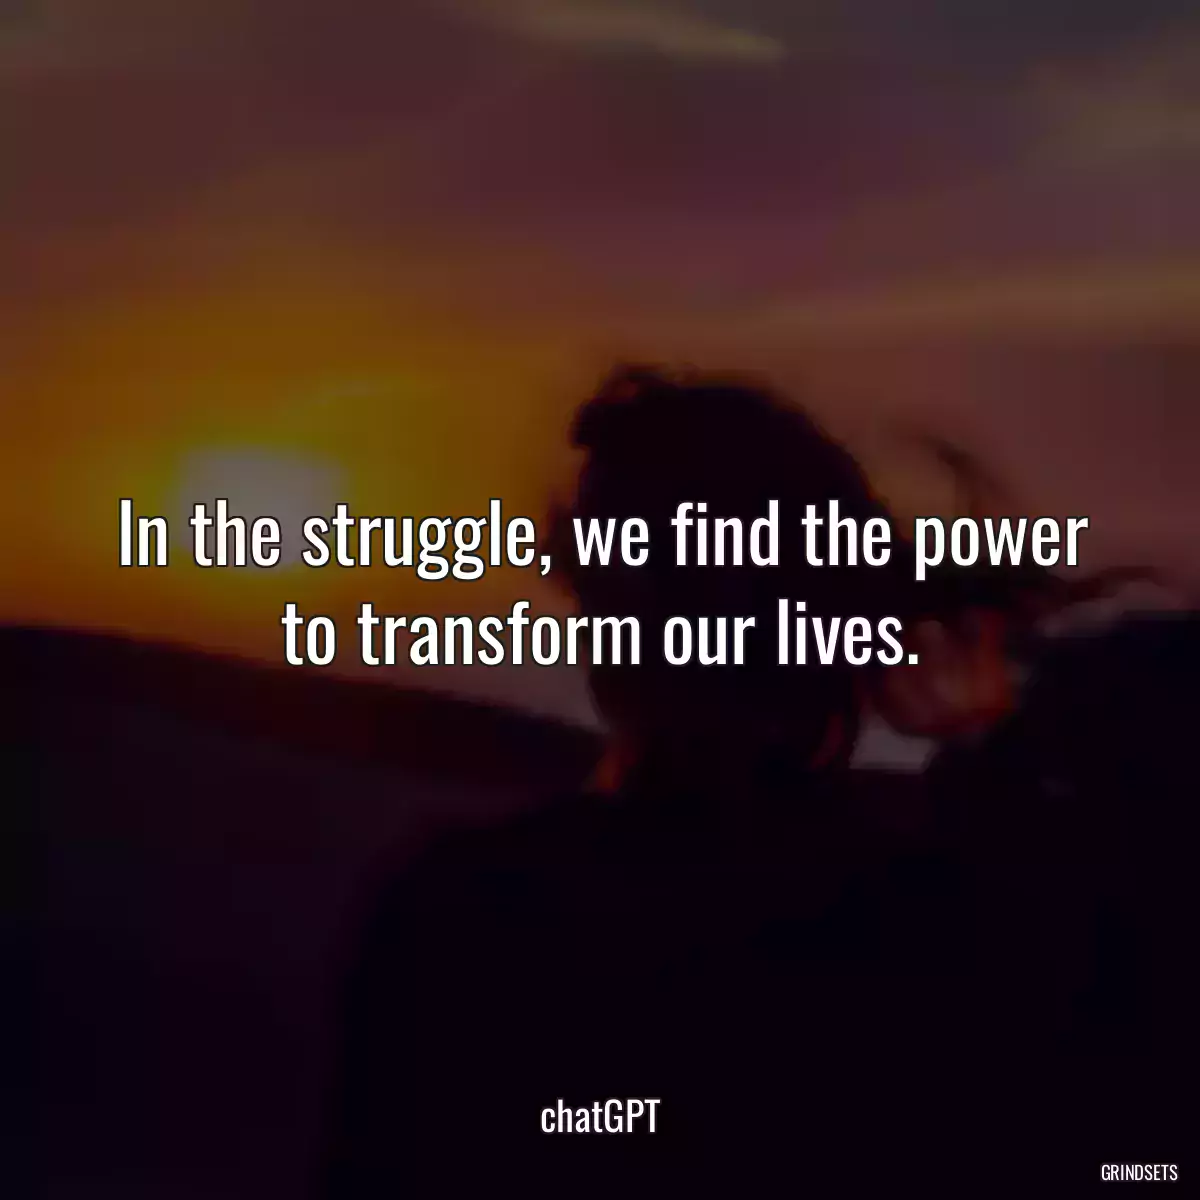 In the struggle, we find the power to transform our lives.